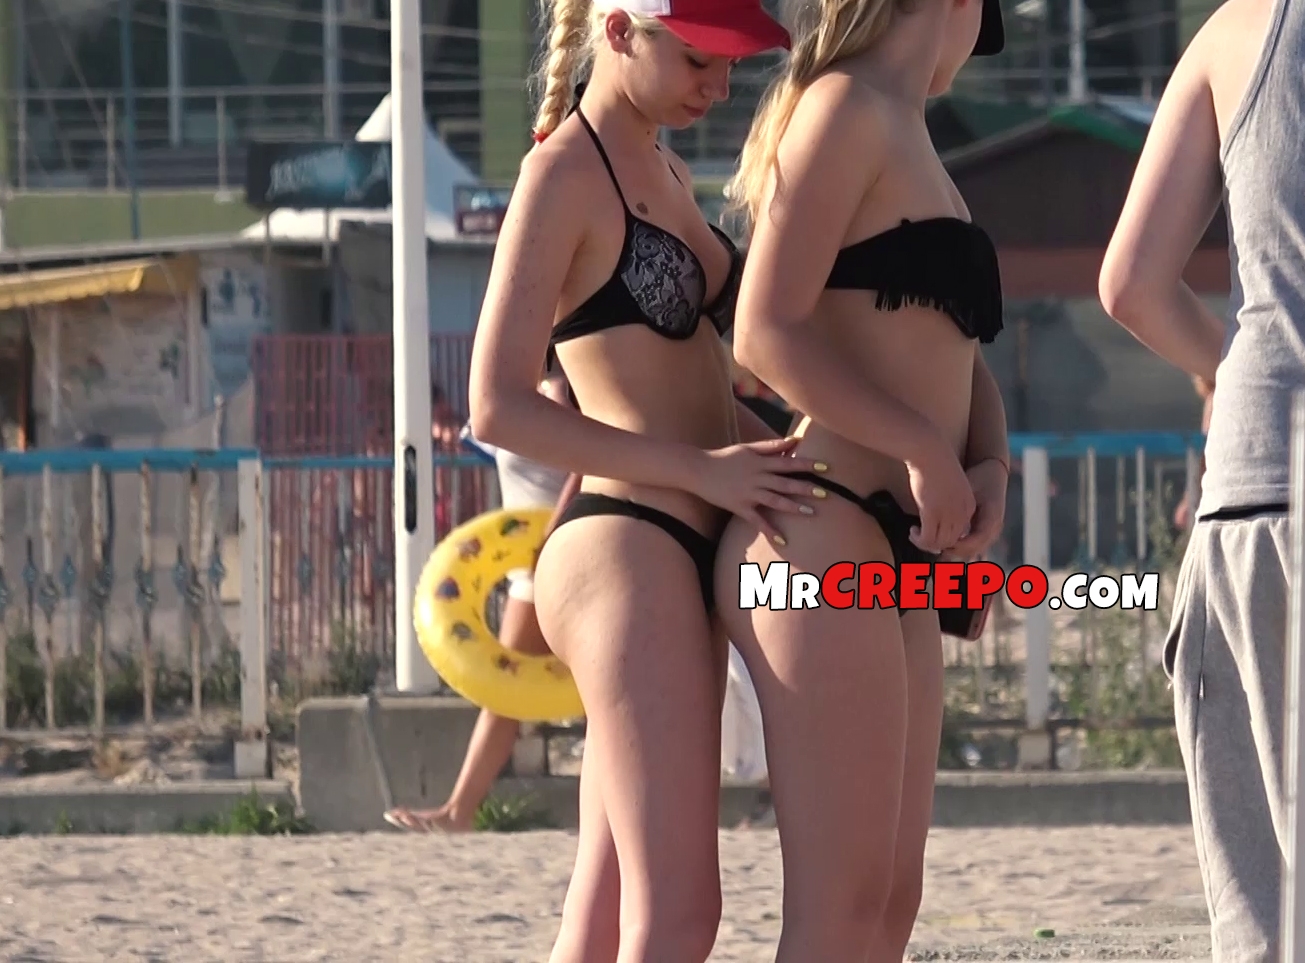 Spying on lesbian teens touching at the beach ~ Mr